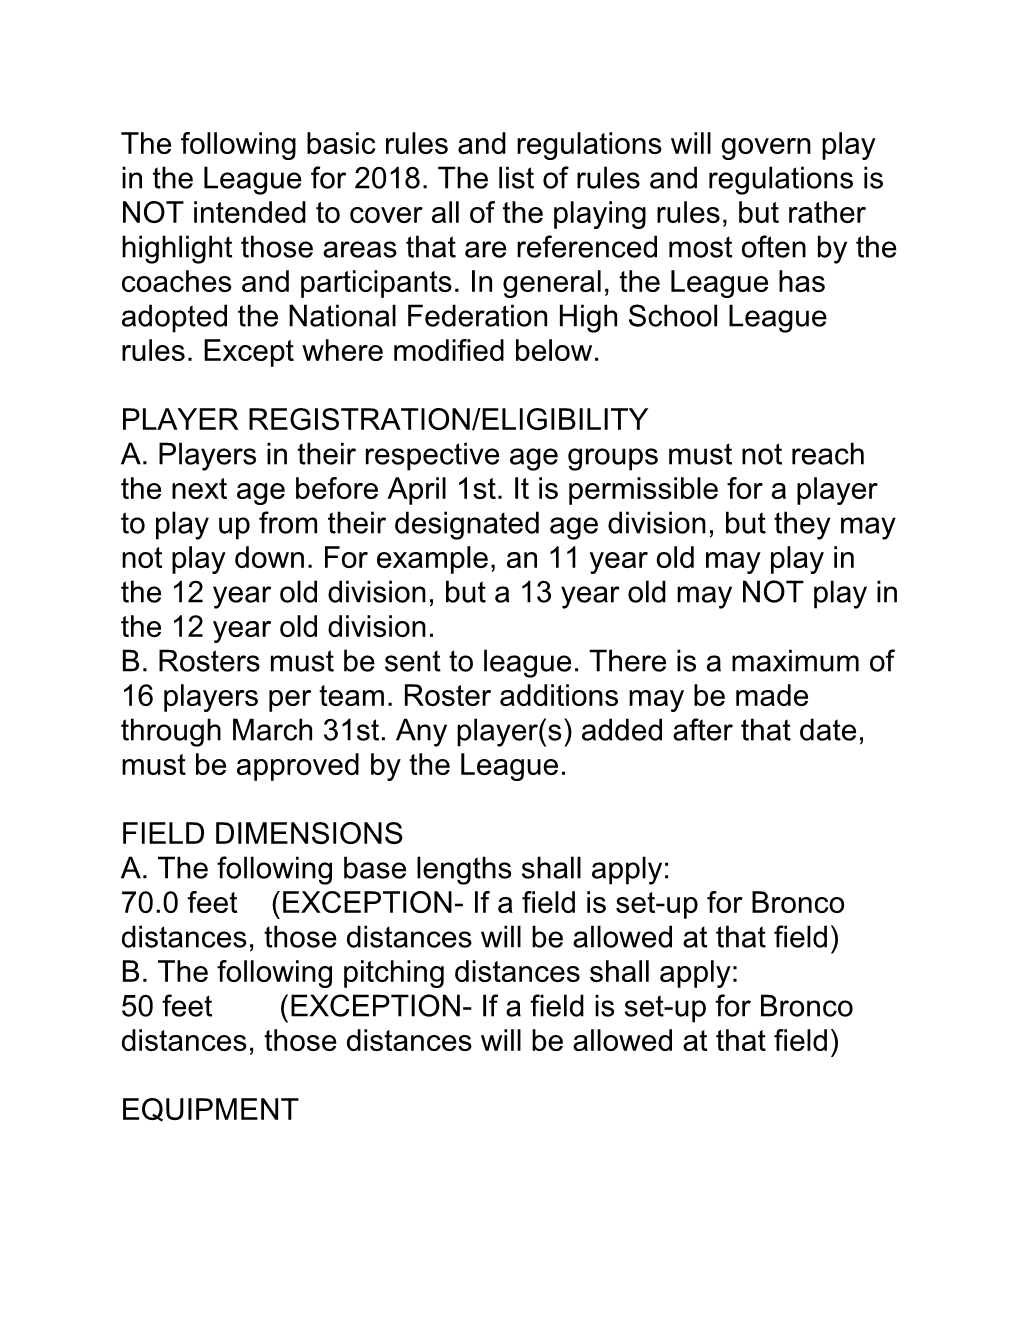 The Following Basic Rules and Regulations Will Govern Play in the League for 2018. The